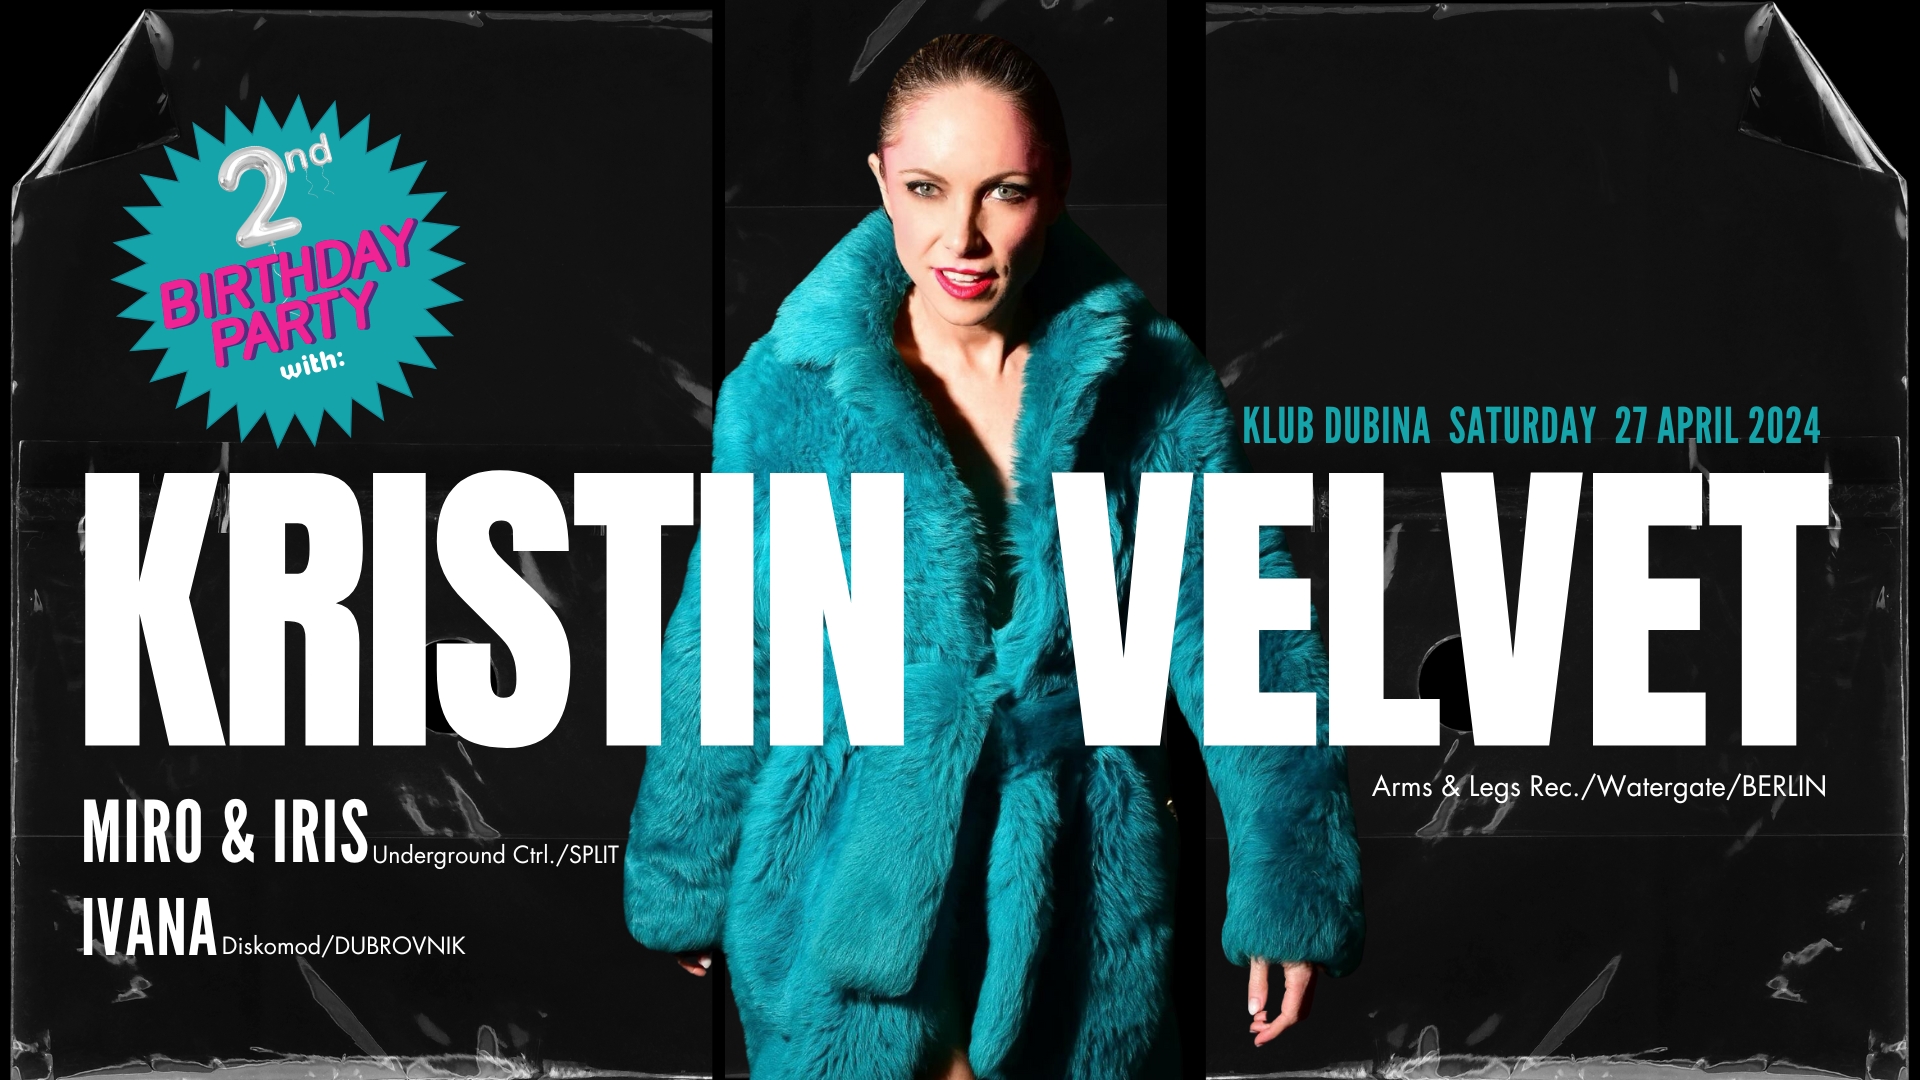 Over the past decade Kristin Velvet’s life has been devoted to music in one way or another - first as a promoter & DJ in Tokyo, then as the Australian label manager of UK’s Domino Records. Today she is an essential figure of Berlin’s club scene, heading up the tasteful Arms & Legs records - the label from Daniel Steinberg & Nils Ohrmann - which has featured a long line of killer remixes & releases from respected artists including Oliver Dollar, Paul Johnson, 808 State, Nick Holder, Jay Haze, DJ W!LD & Crazy P. Velvet’s music taste is broad and her flexibility behind the decks sees her traversing confidently across genres and decades but always with a keen eye on the dance floor, a place she inherently understands. A skilled DJ who plays with a lot of heart her infectious energy has earned her peak time slots across the globe everywhere from Watergate Berlin (DE), DTLA Los Angeles (USA), Ministry of Sound London (UK), District Liverpool (UK), The Green Door Store, Brighton (UK), Arm Club Kassel (DE), Le Petite Ban Paris (FR), Beton Brut Seoul (KR), Revolver Melbourne (AU) to Subsonic Music Festival Australia (AU). Behind the decks, alongside Kristin, catch Underground Control/Club Otium's masterminds from Split - Iris & Miro, and our very own Ivana.